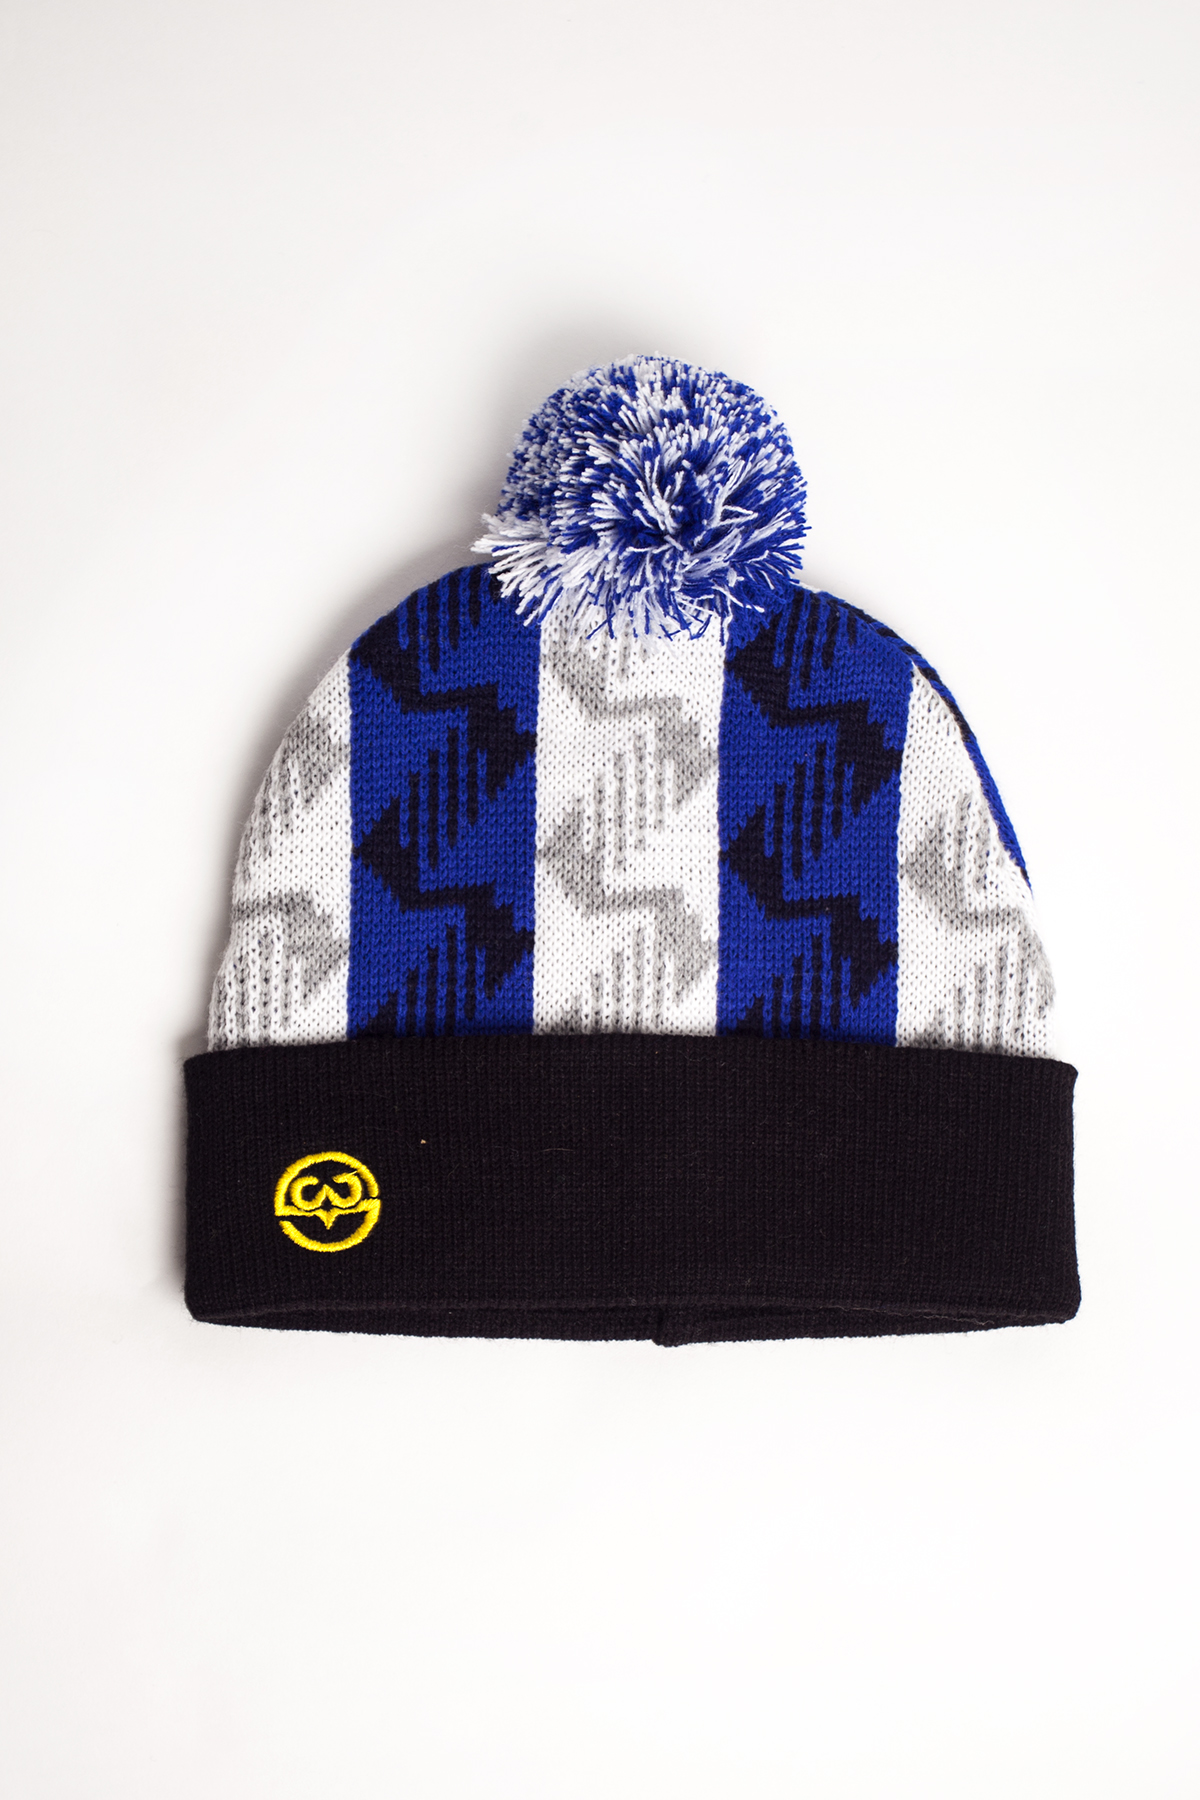 Arena Sheffield Wednesday Supporters Royal Blue and White Bobble Hat 